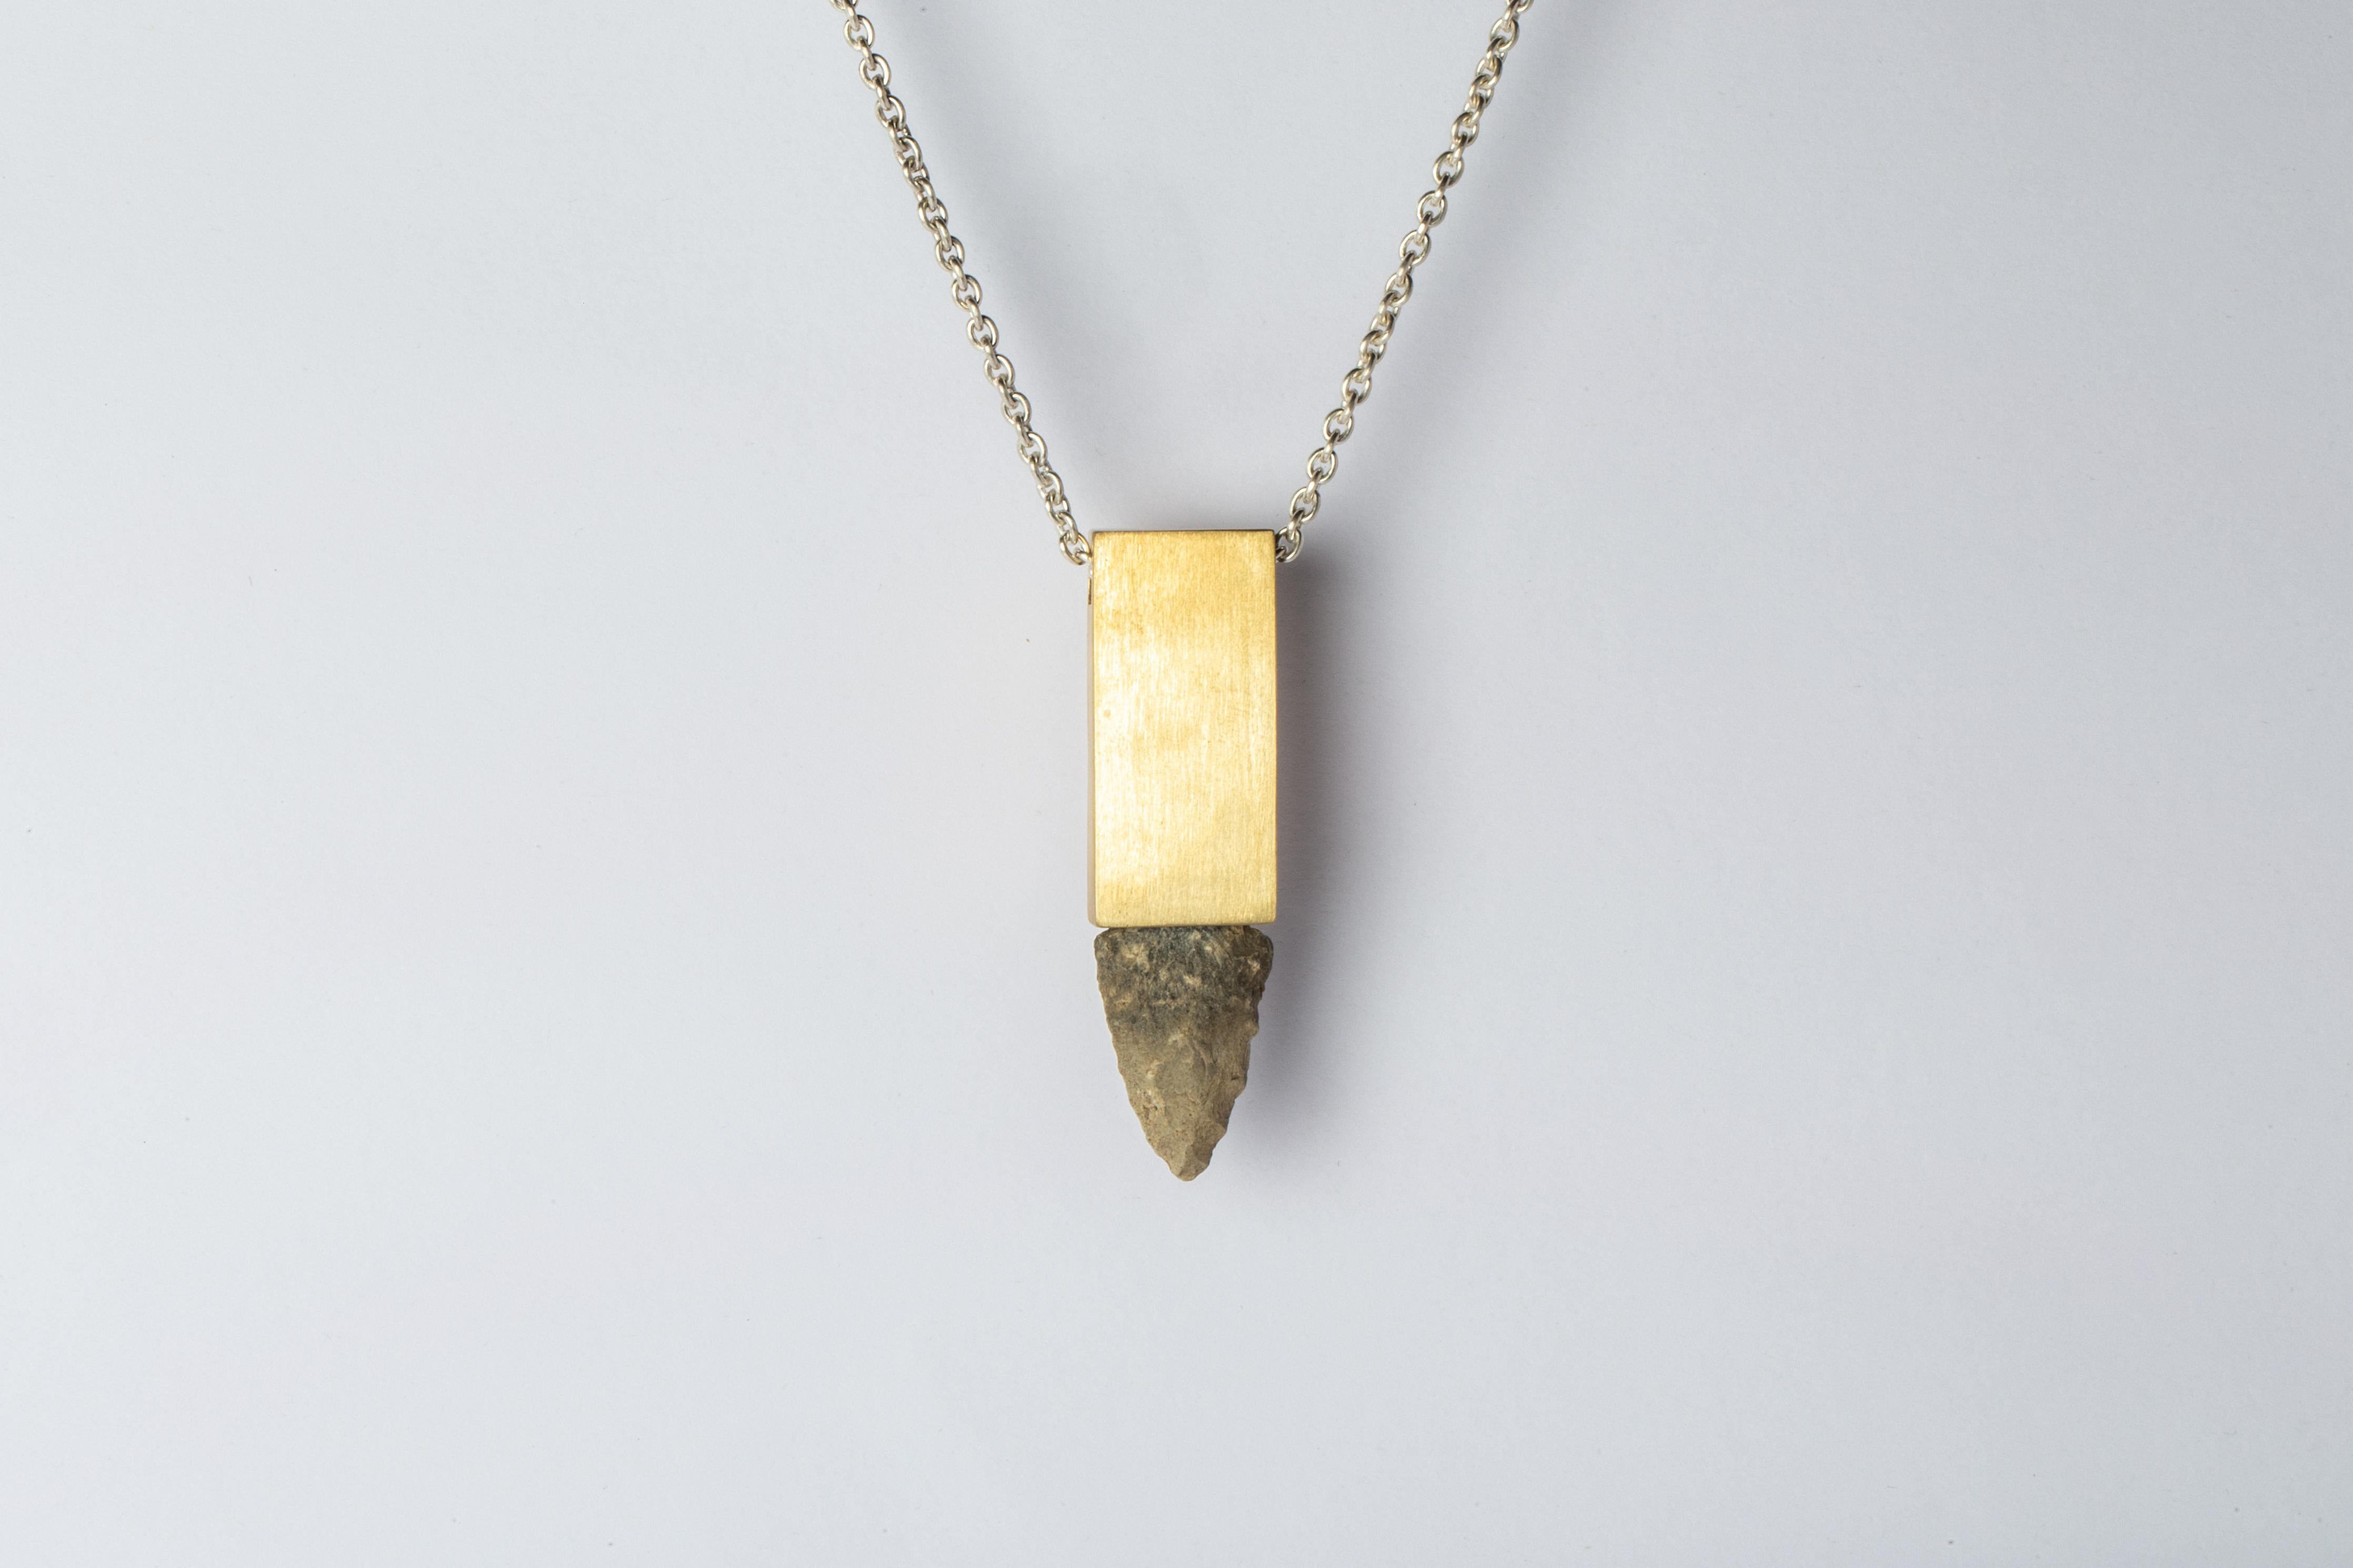 Necklace in the shape of cuboid made in matte brass, matte sterling silver, and arrowhead. The arrowhead was found in Massachusetts with possible tribe relationship to: Mohawk, Mahegan, Pocumtuc, Nipmuc, Pequot, Wampanoag or Norwottuck.

These